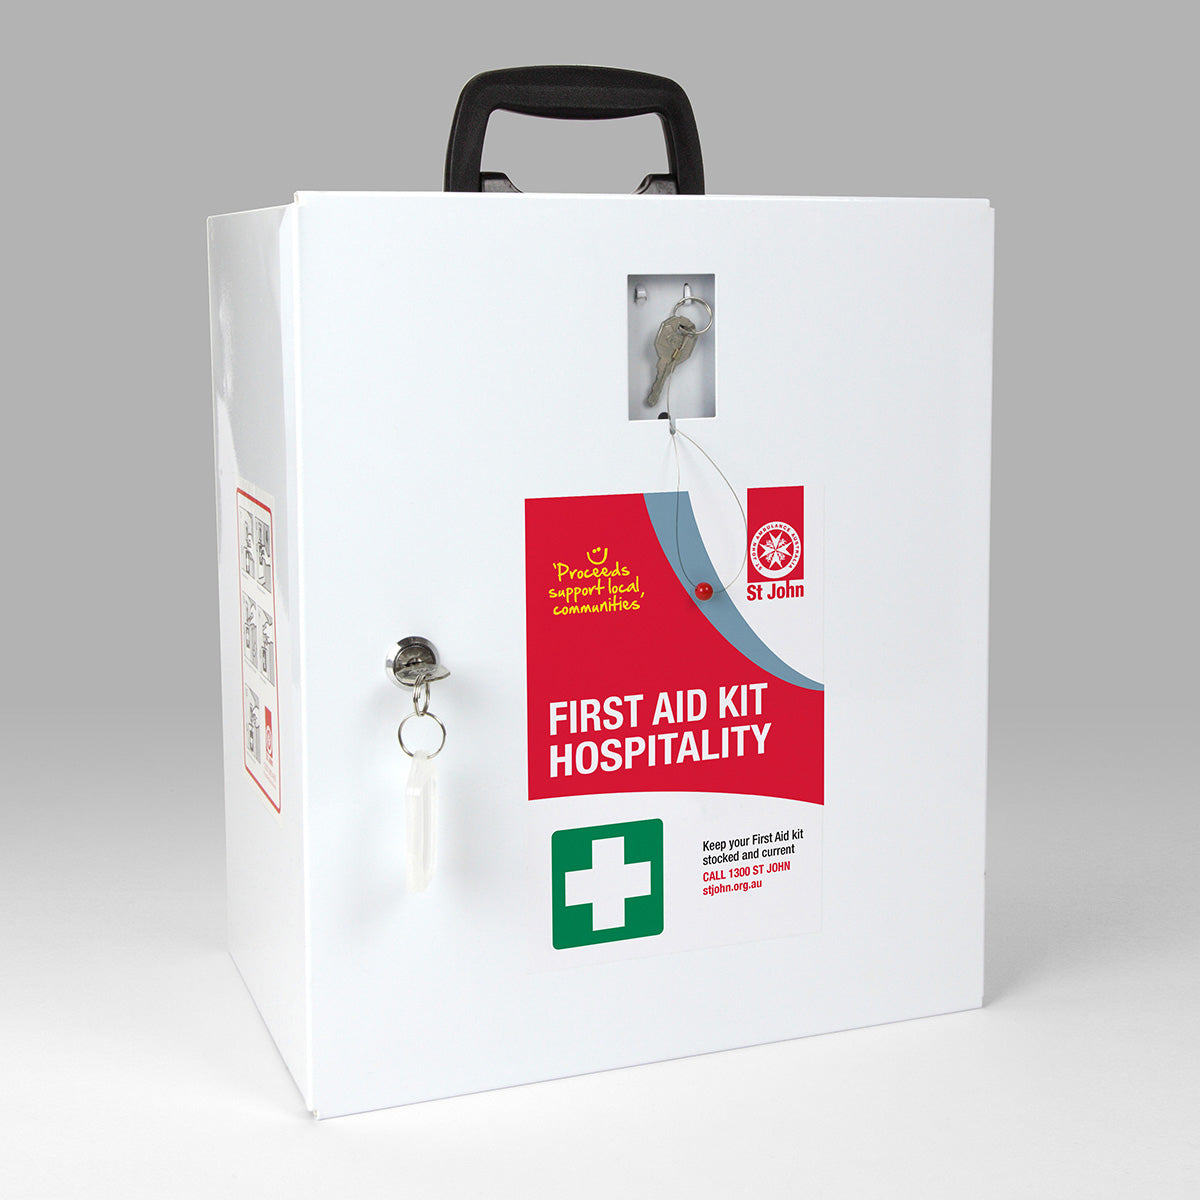 Hospitality Wall Mount and Portable Refills